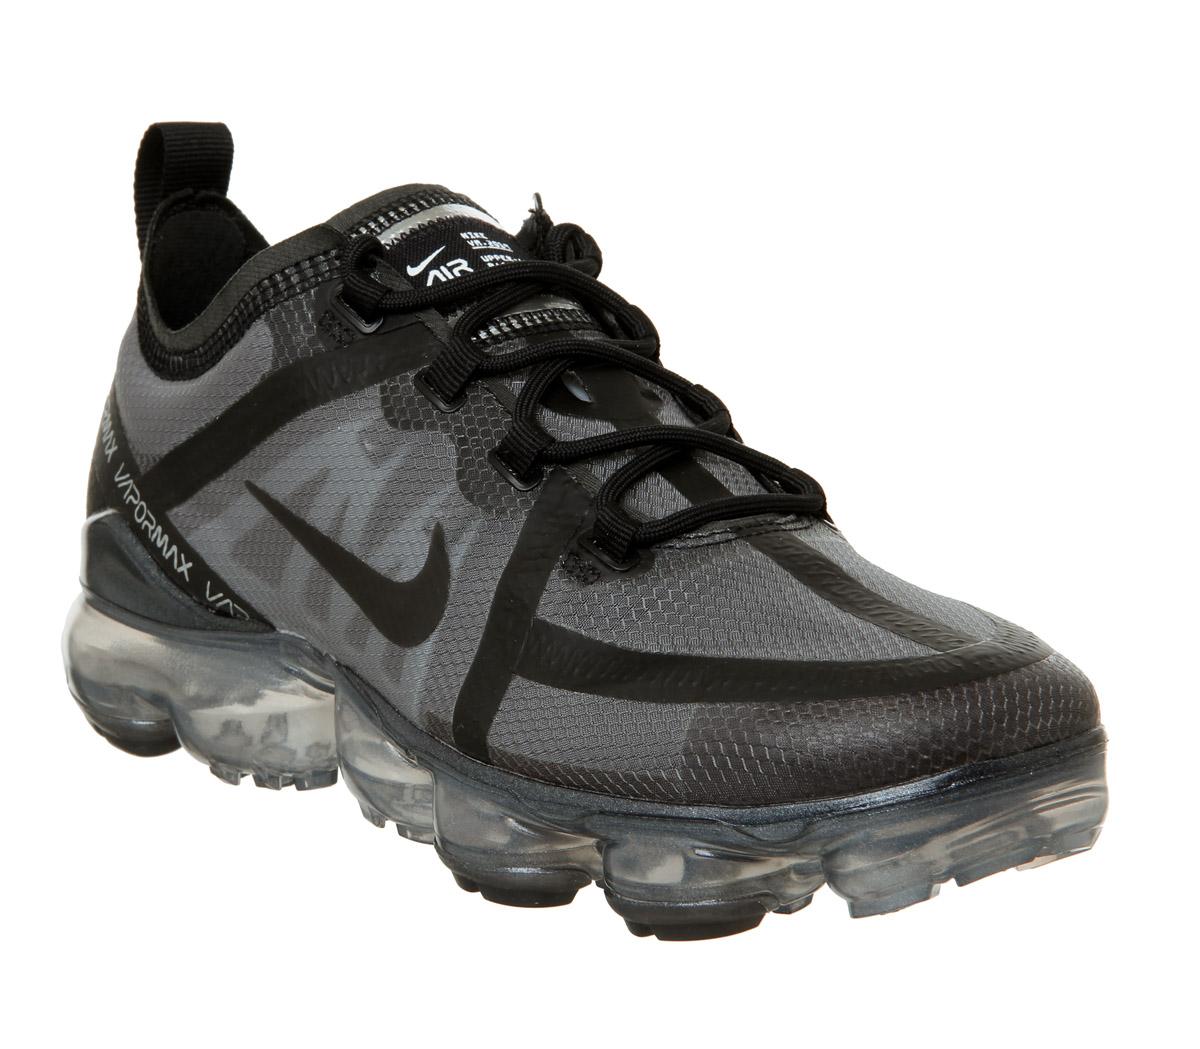 nike running vapormax 2019 trainers in black